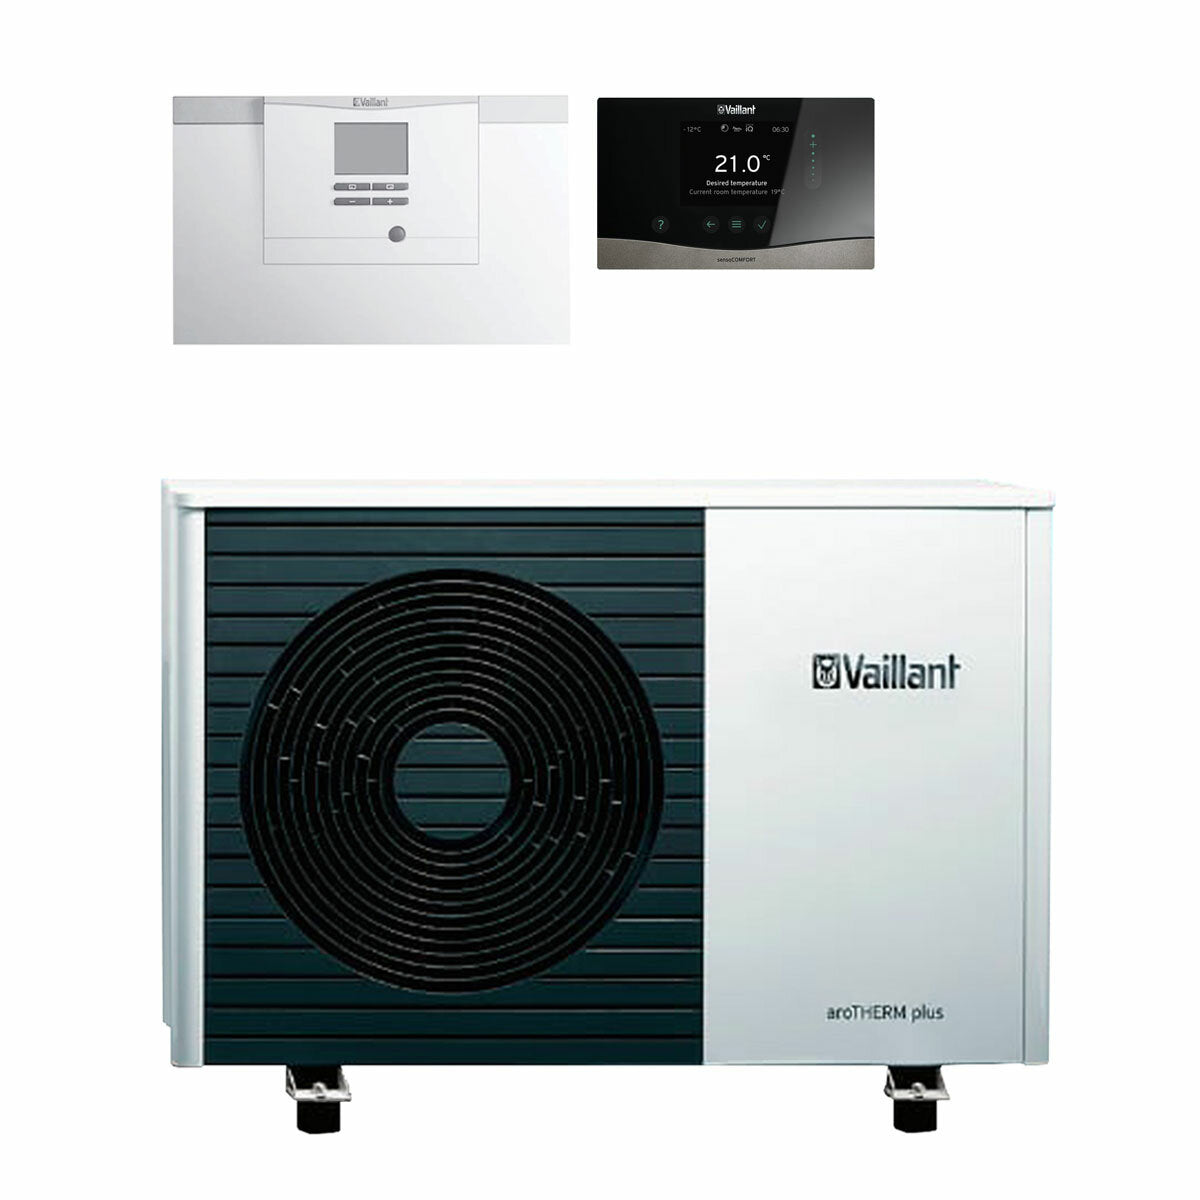 Vaillant aroTHERM plus VWL 55/6 air-to-water heat pump 5 kW 230 V single-phase monobloc R290 A++ high temperature